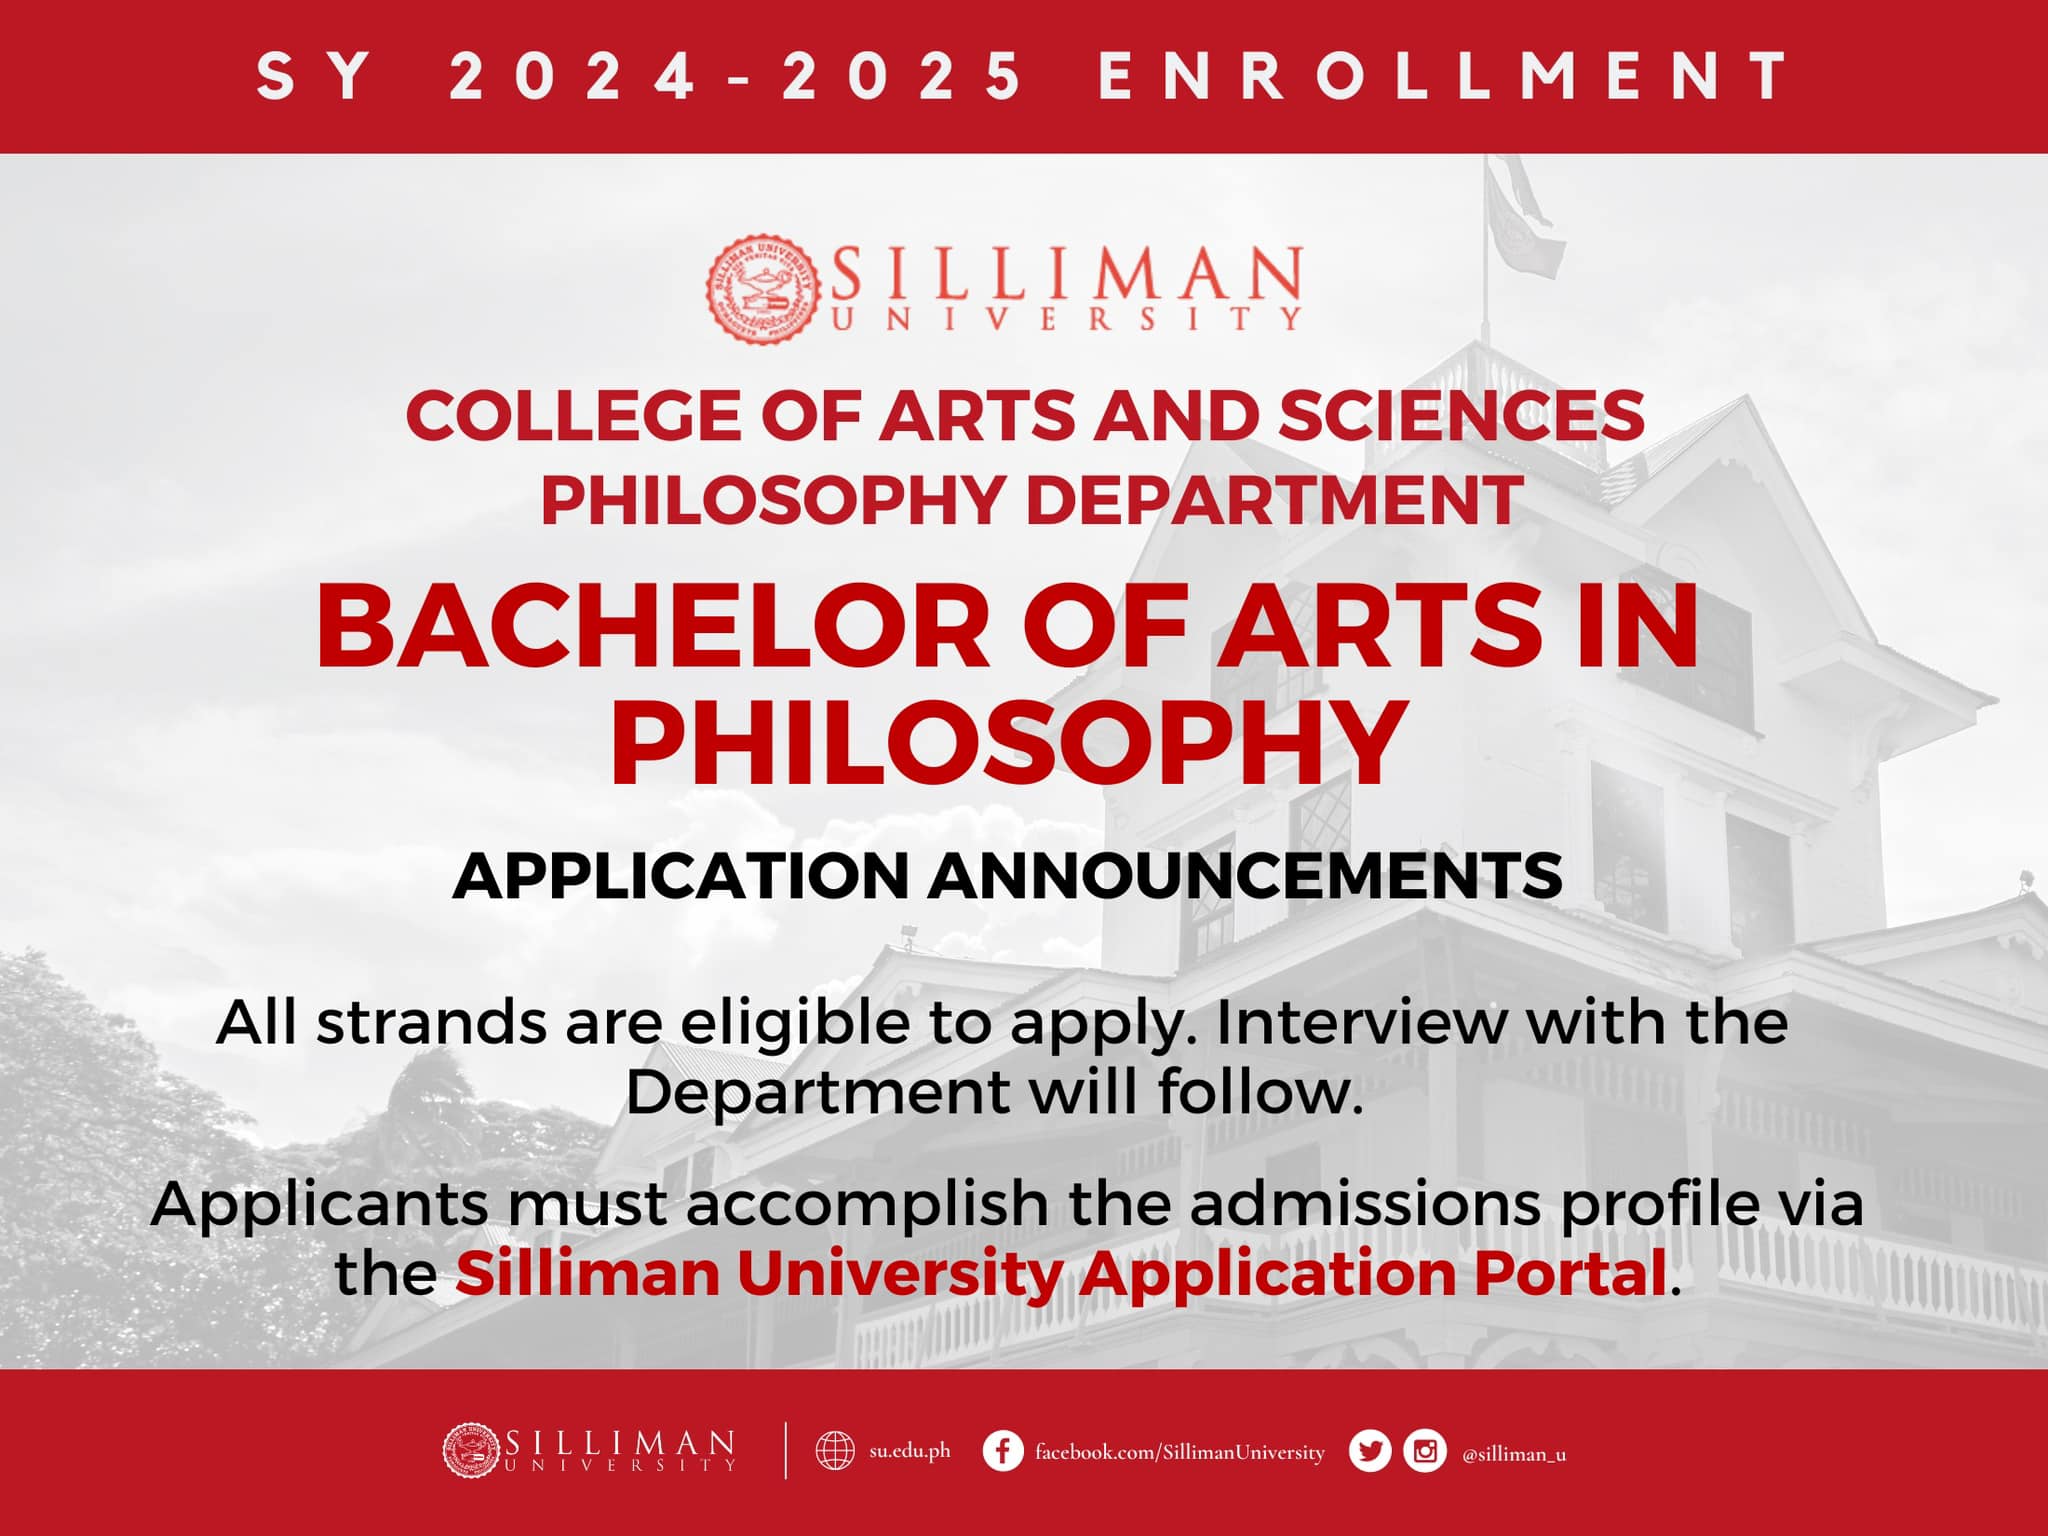 College of Arts and Sciences – Philosophy Department is now accepting Bachelor of Arts in Philosophy applications for SY 2024-2025